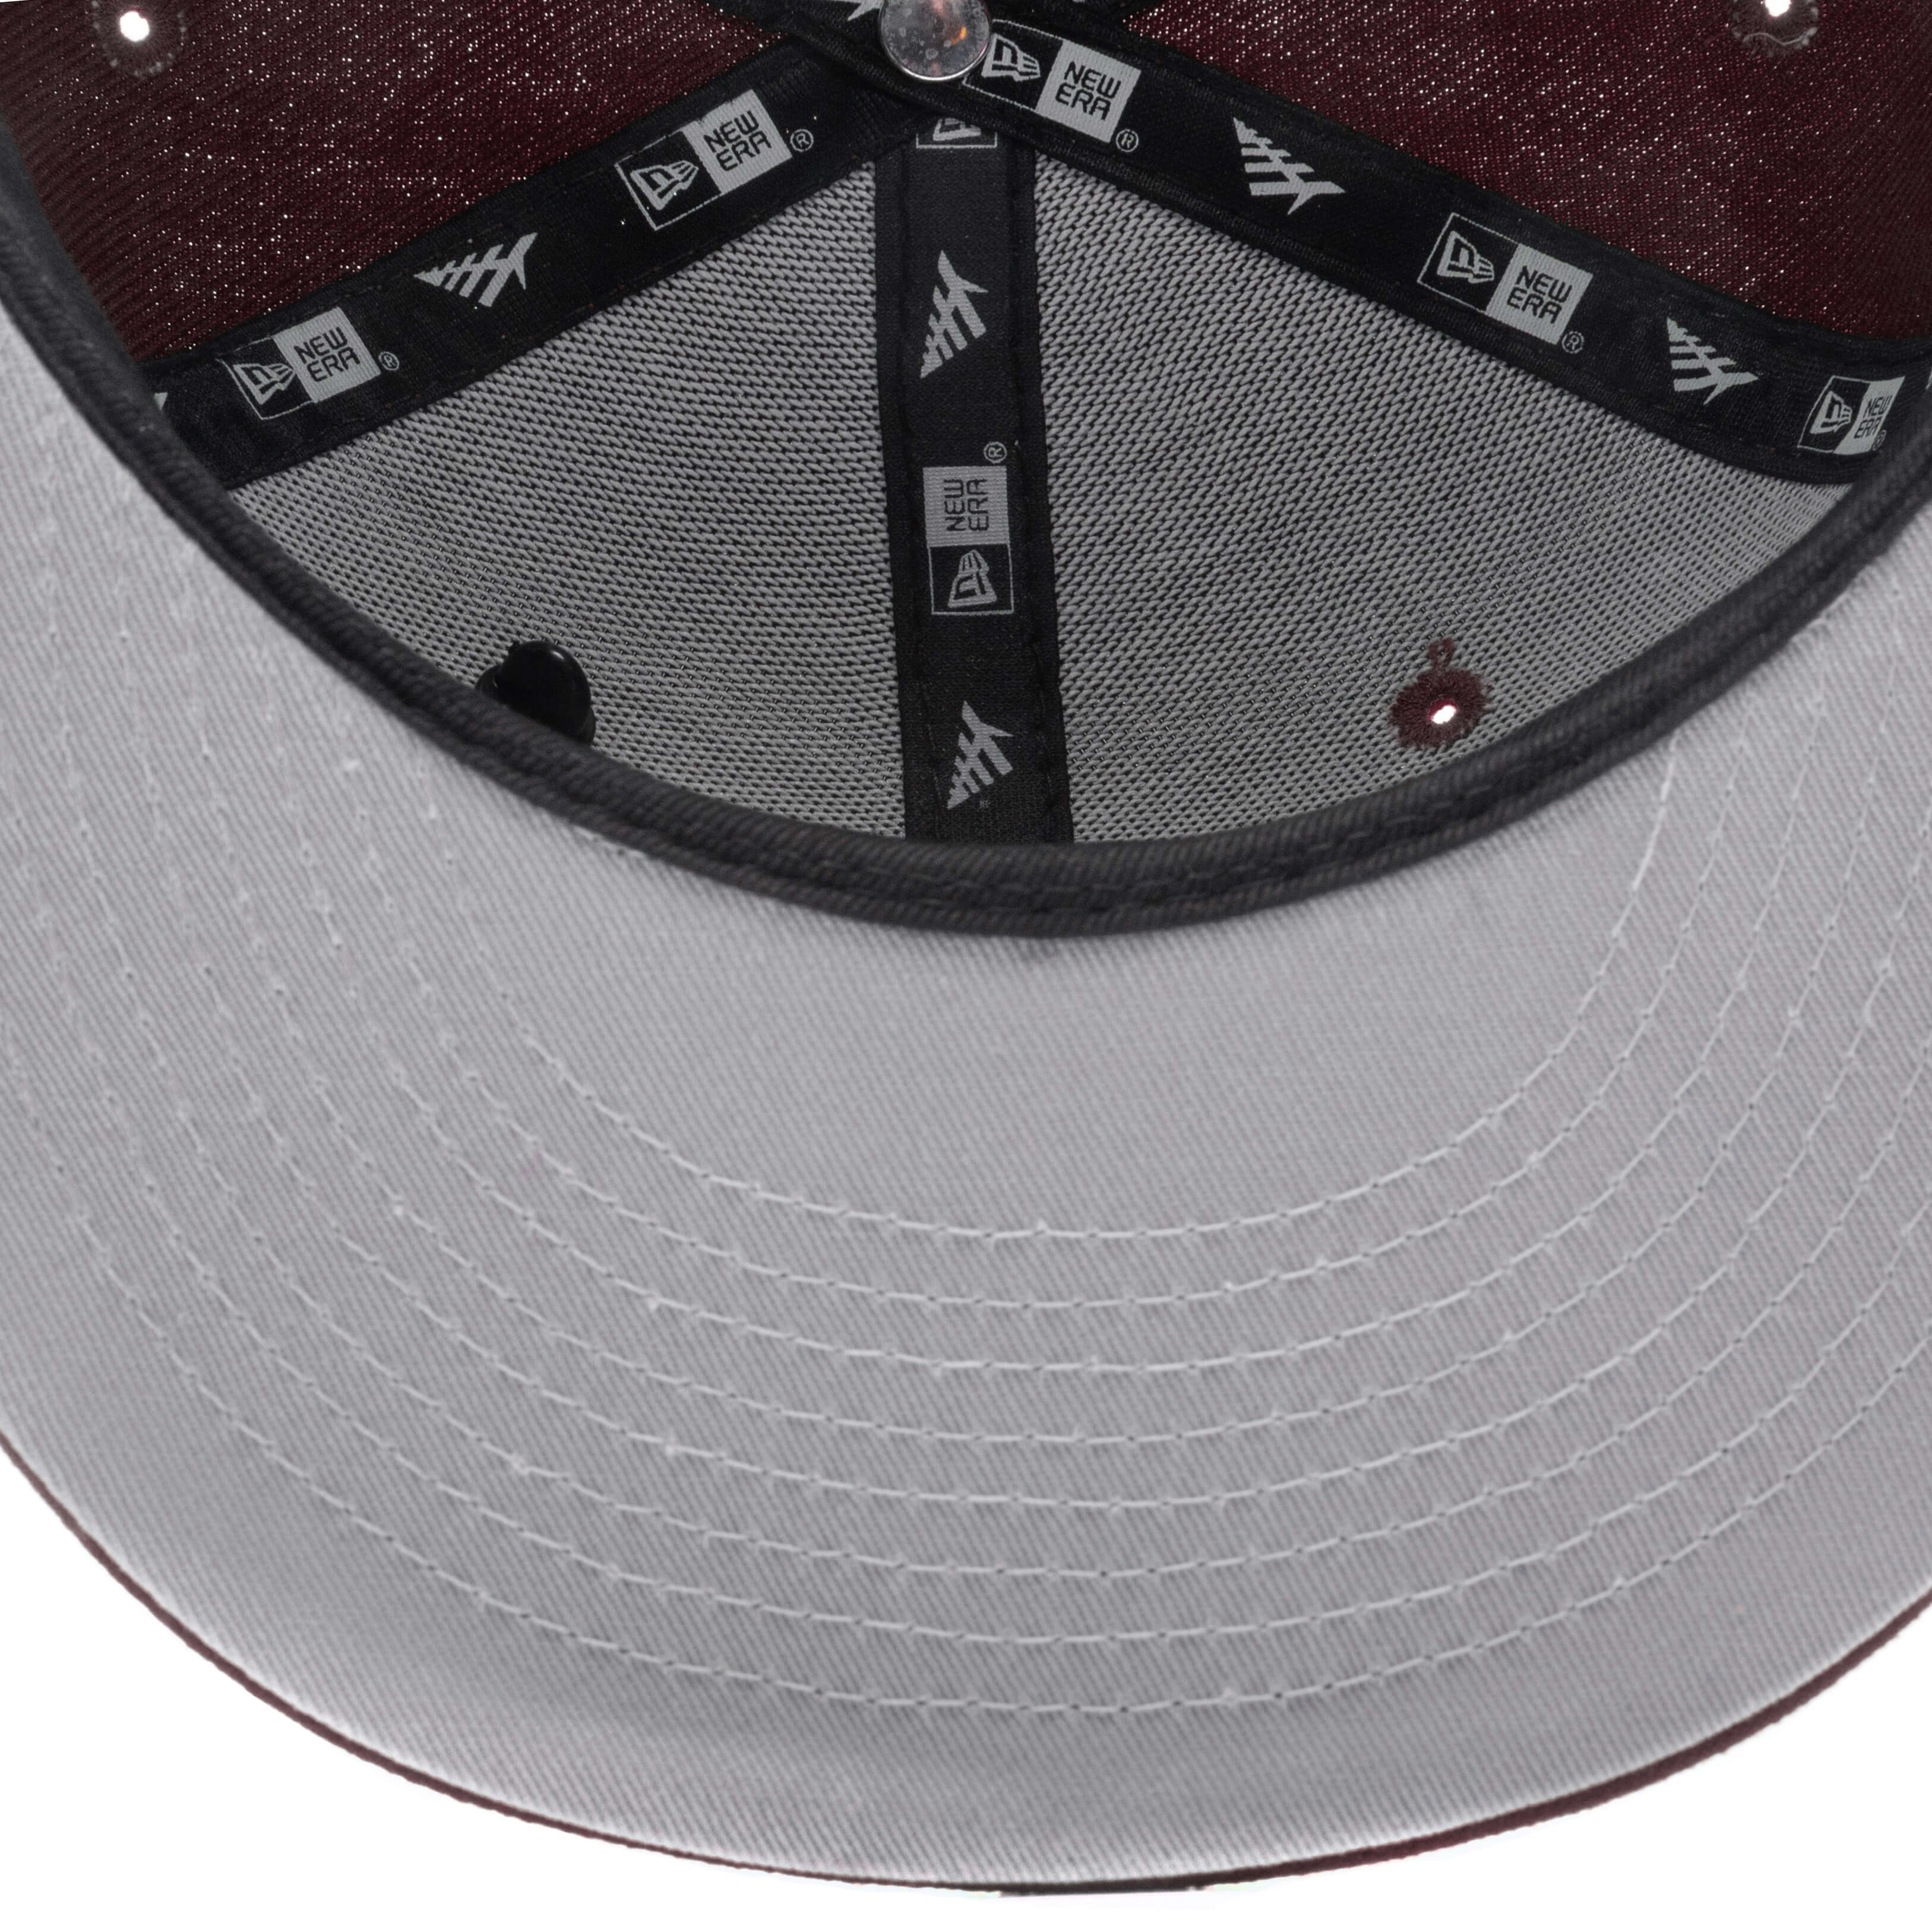 Feature x Paper Planes Startrail Snapback Wynn - Maroon, , large image number null